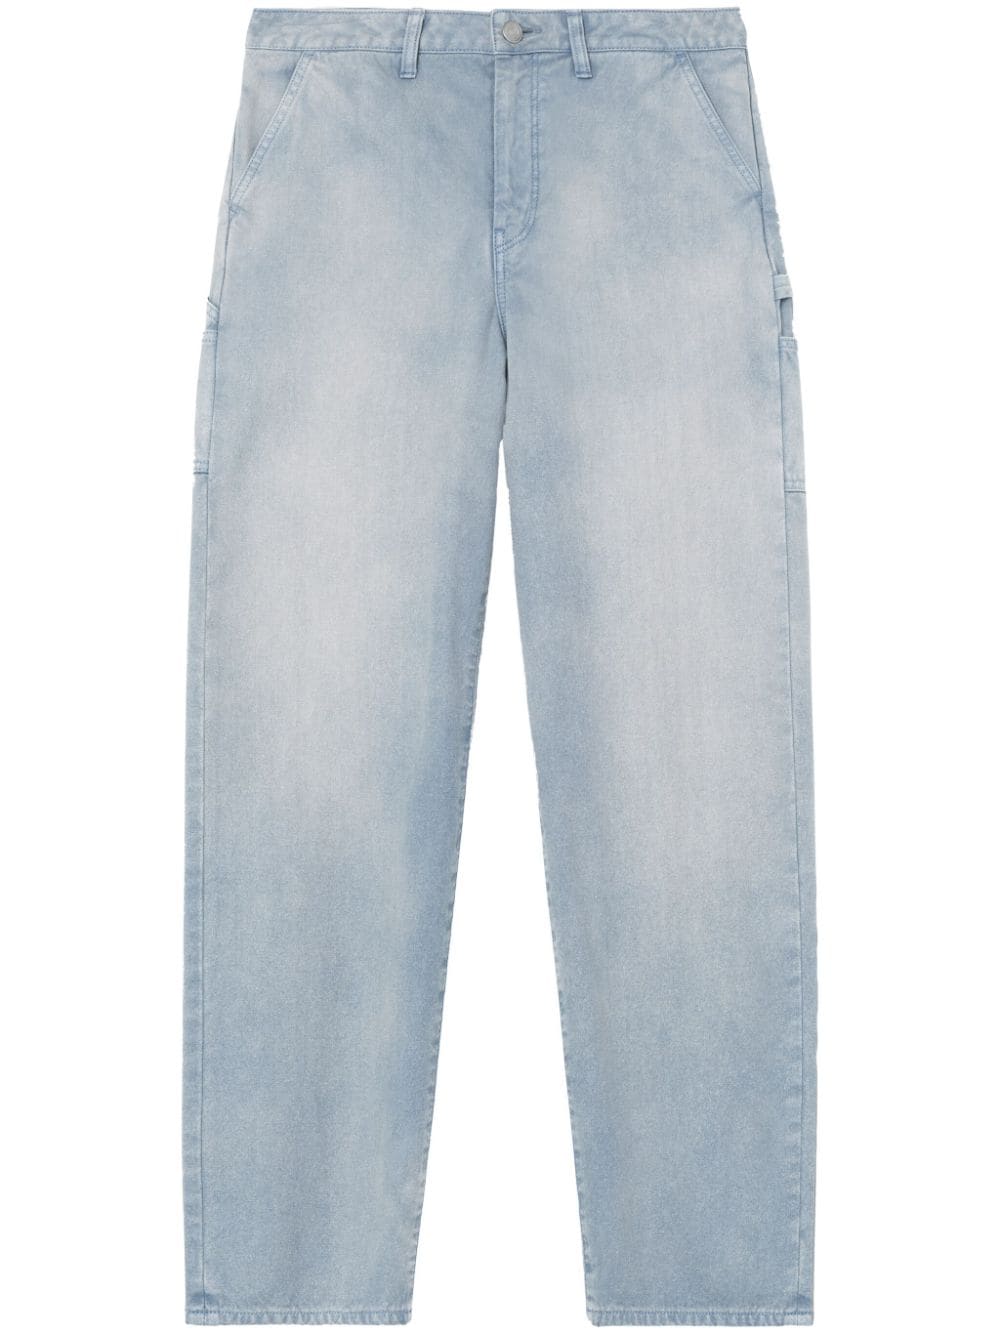 Utility Work mid-rise jeans